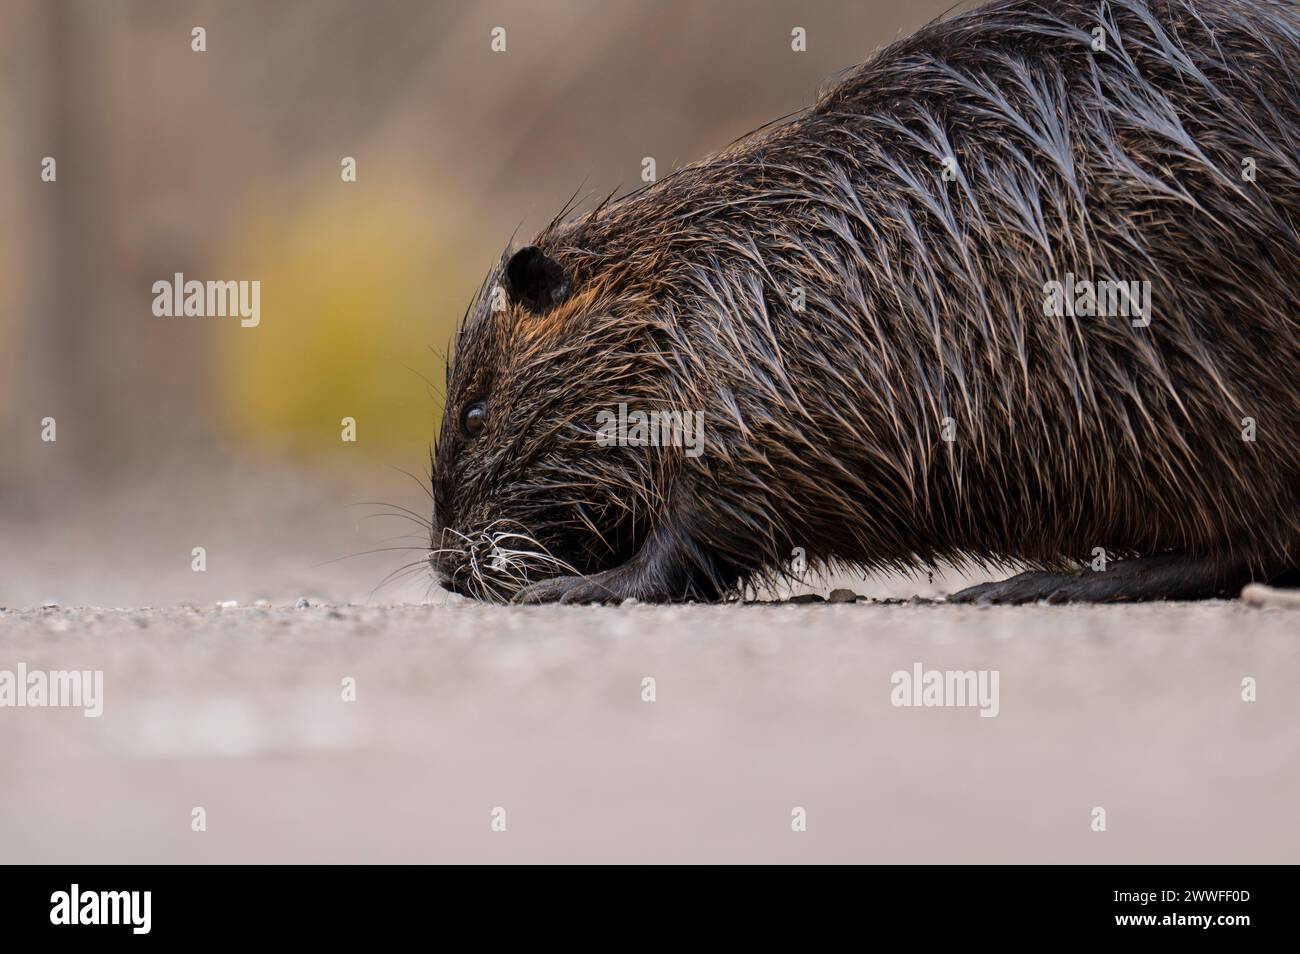 Nutria (Myocastor coypus), wet, walking across a gravelled path to the left with its nose on the ground, profile view, close-up, background blurred Stock Photo